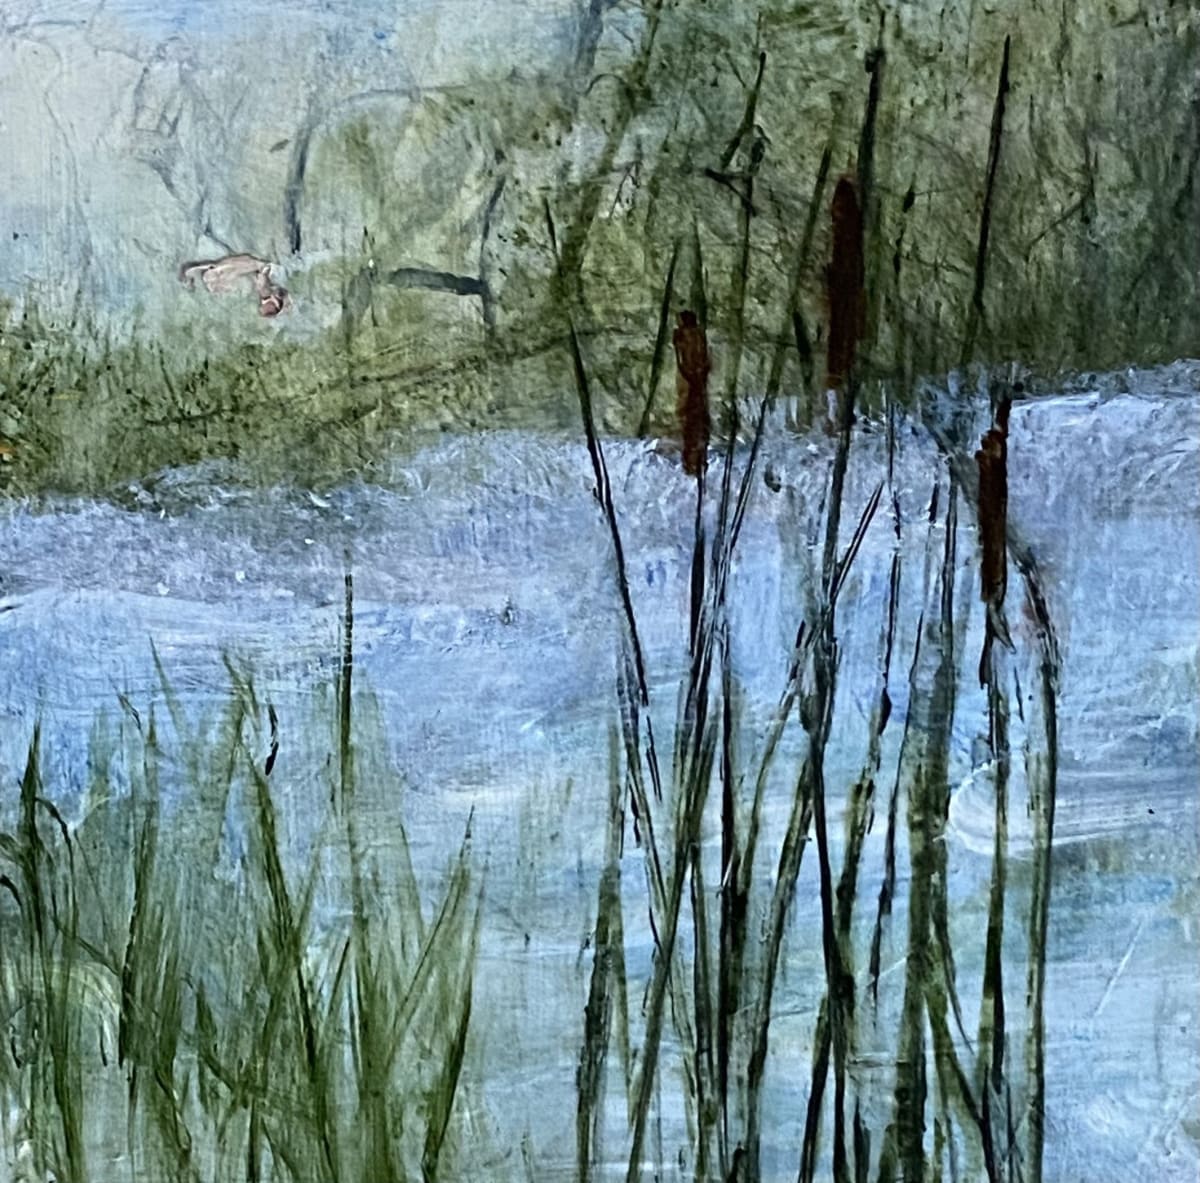 Juanita Bellavance, Freshwater marshes, From the 25 Days of Minis portfolio, 2021, Acrylic on panel, 6 x 6 inches, Framed  Image: Juanita Bellavance, Freshwater marshes, From the 25 Days of Minis portfolio, 2021, Acrylic on panel, 6 x 6 inches, Framed